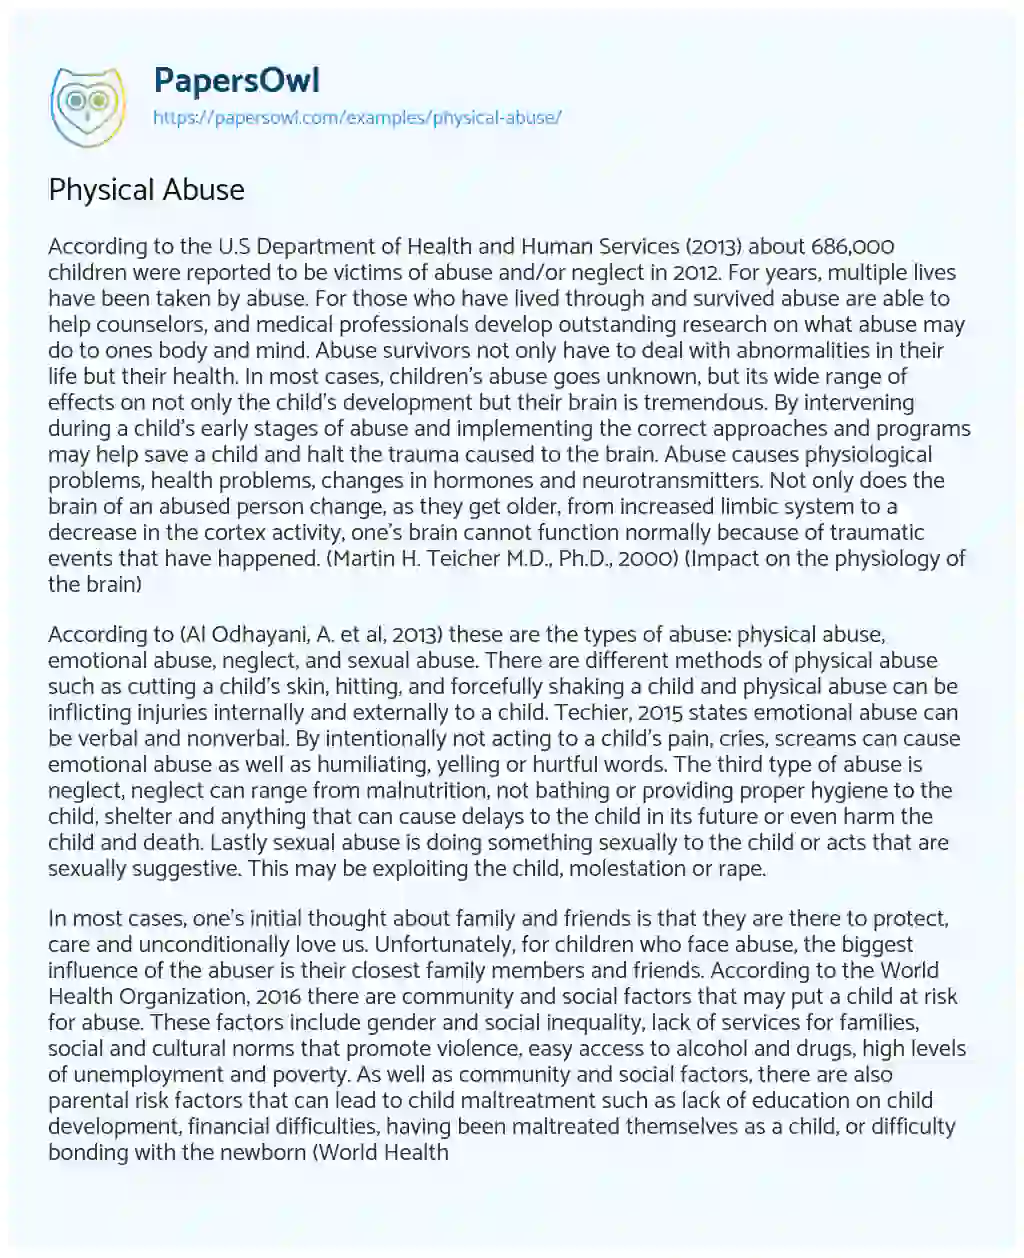 Essay on Physical Abuse